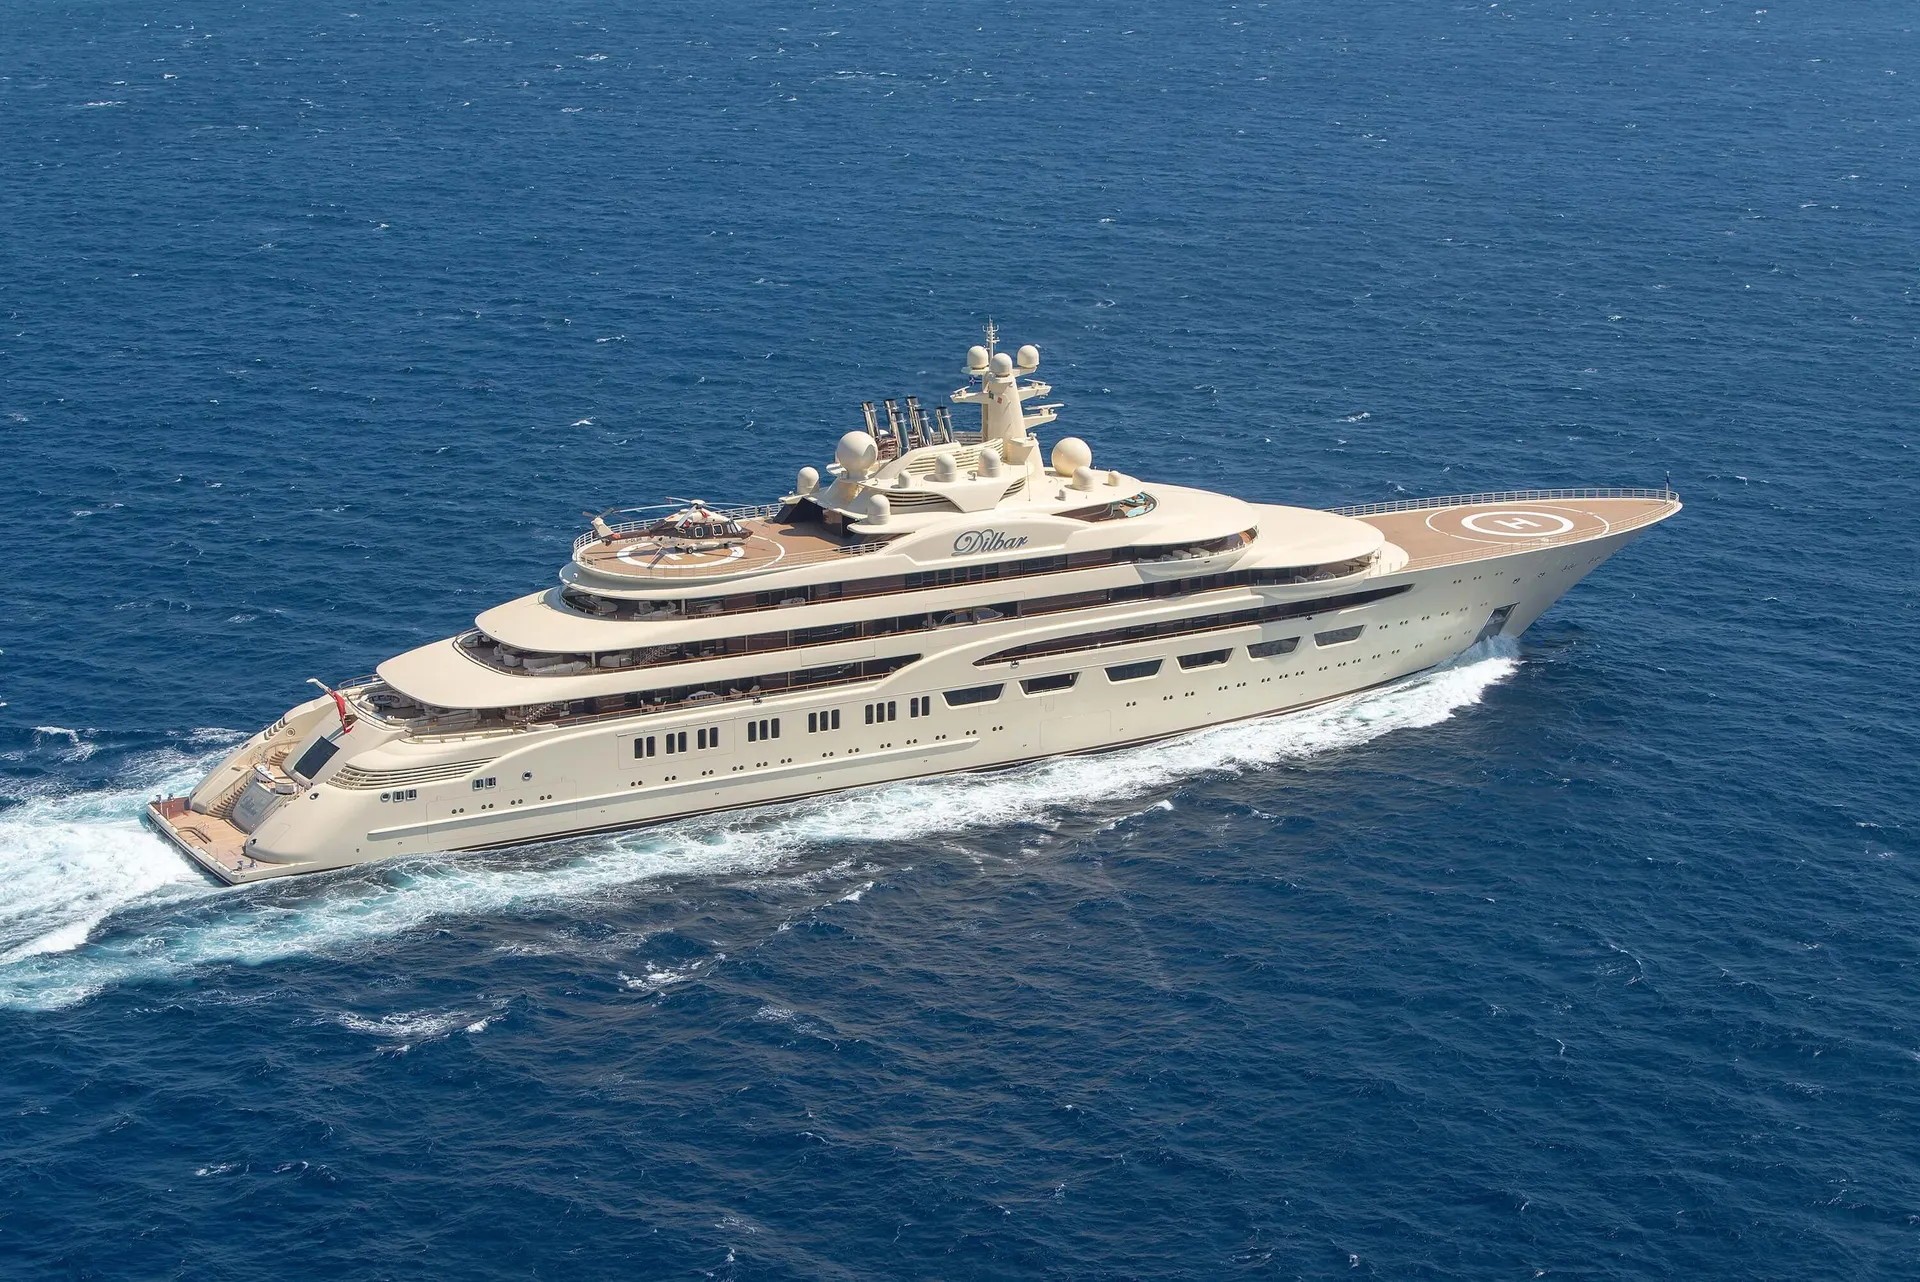 largest motor yacht one person can operate